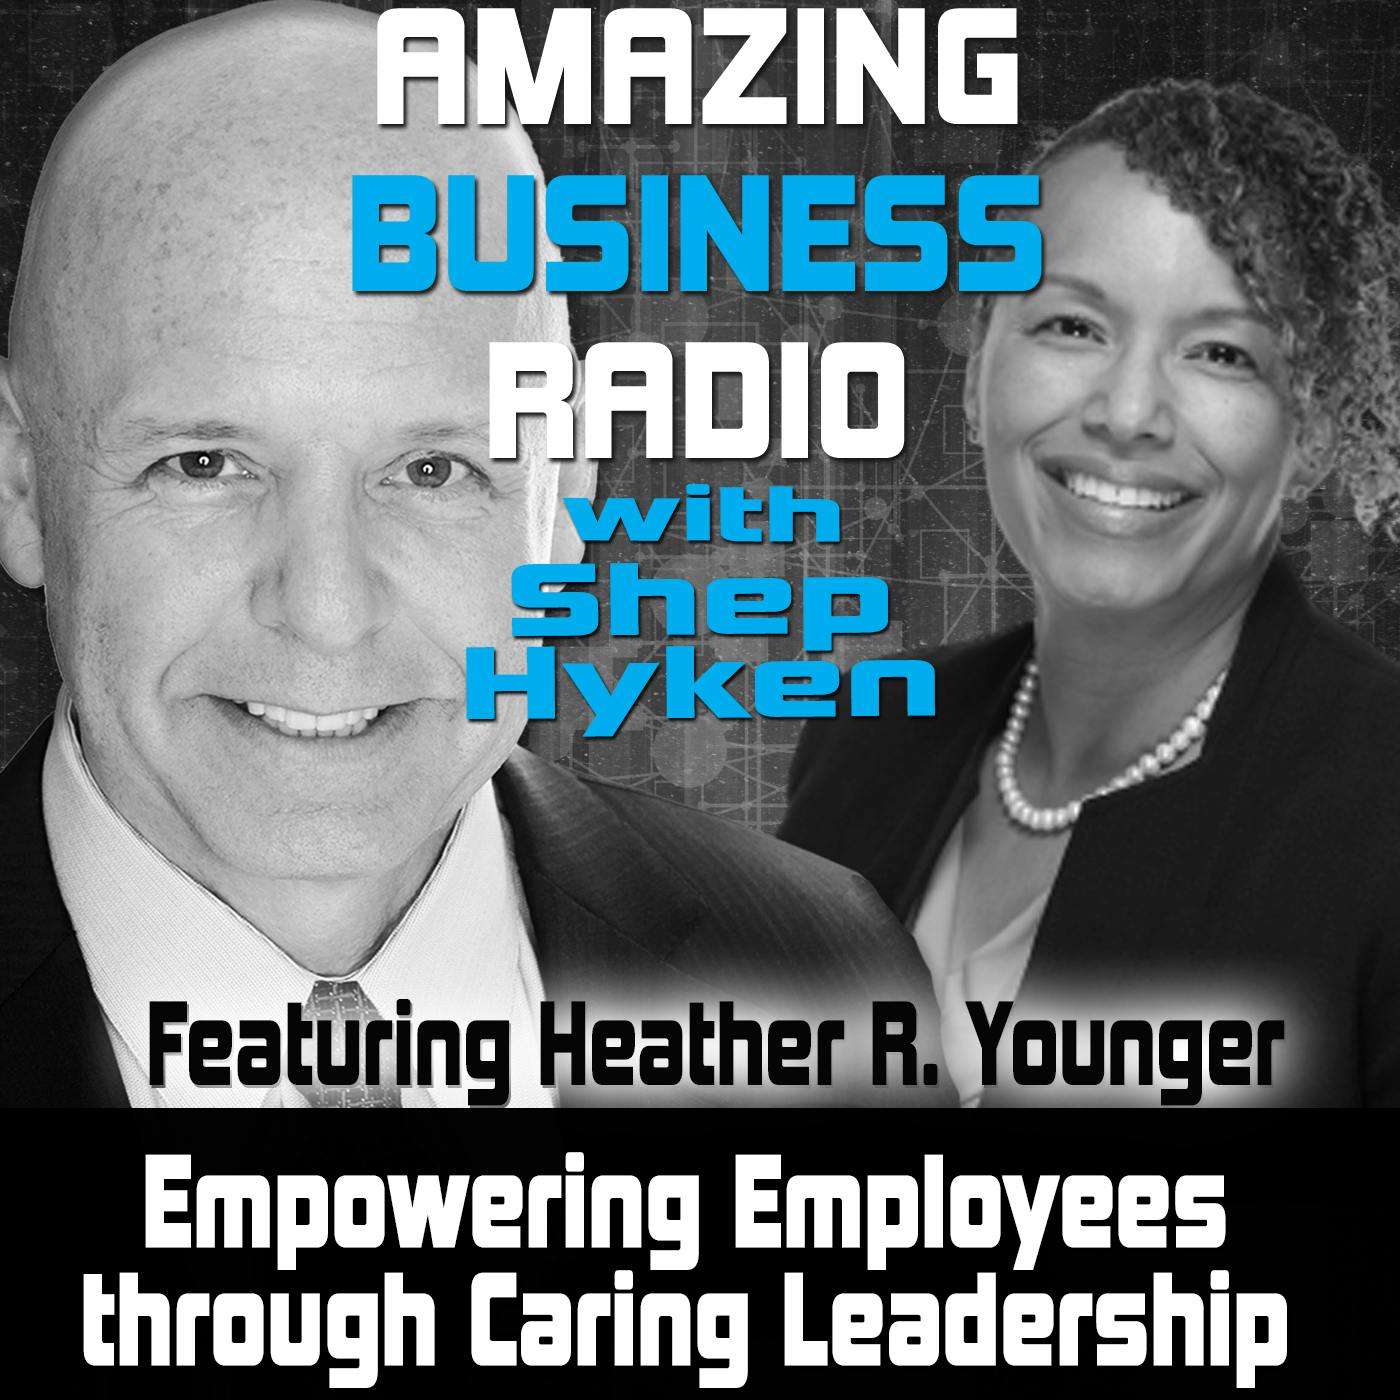 Empowering Employees through Caring Leadership Featuring Heather R. Younger